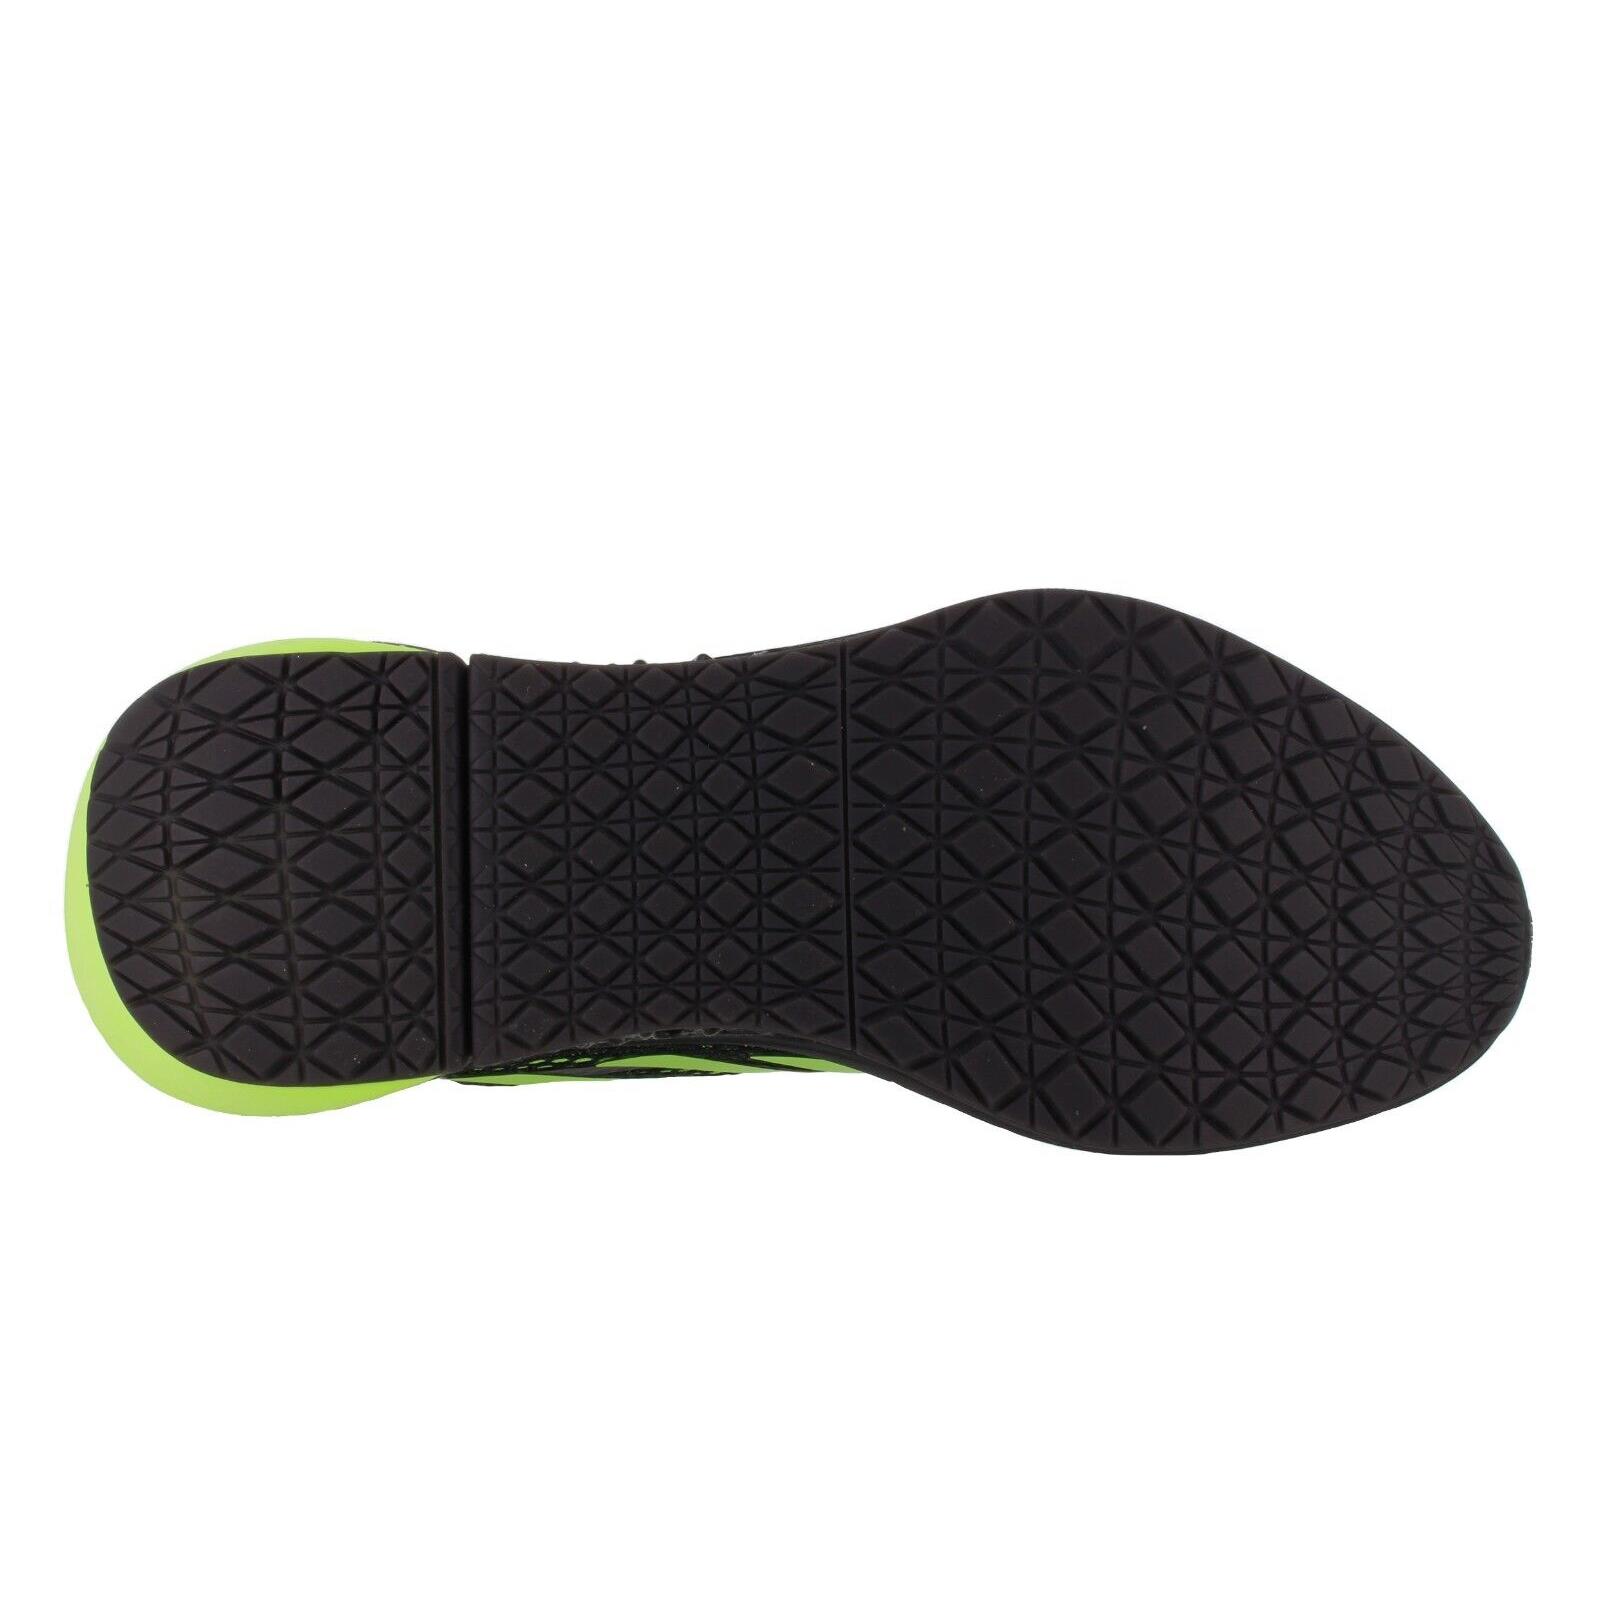 Adidas shoes FWD Pulse - Core Black, Signal Green, Carbon 4